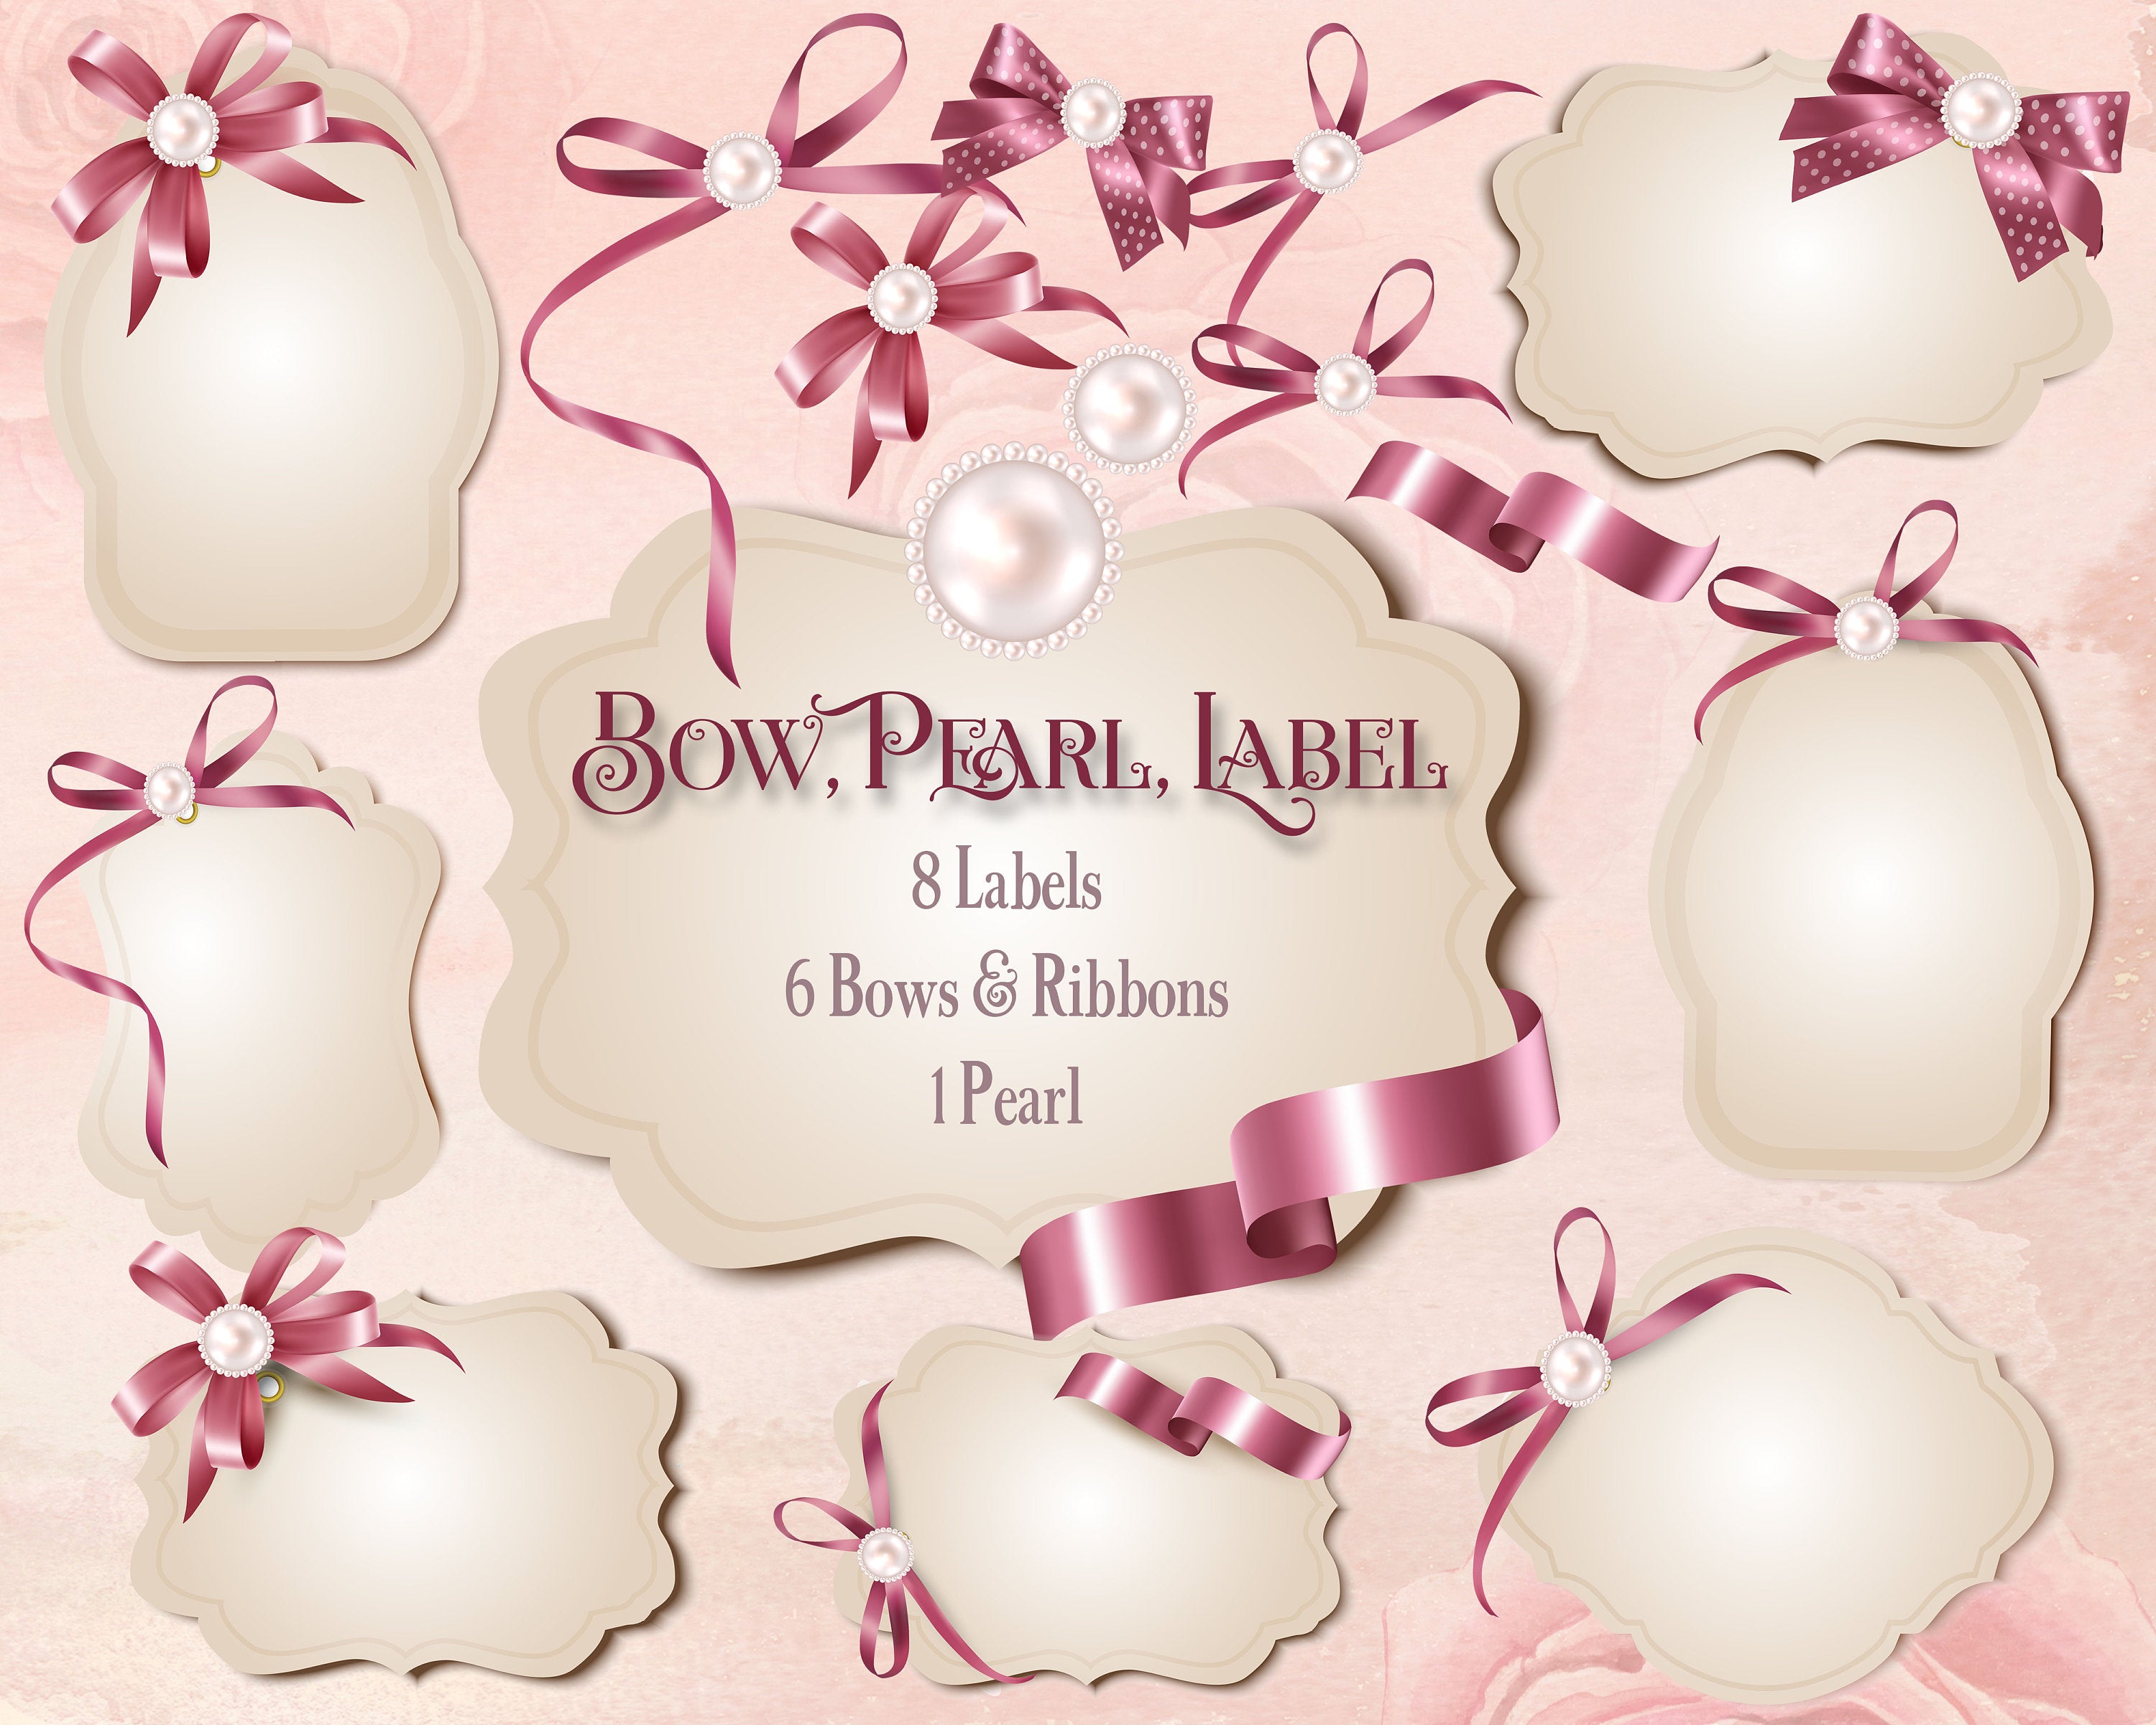 Bow with Pearl Label Frame, Shiny Bow,Satin Bow,Instant Download,Digital Clipart, Bow Clipart,Pearl Clipart,Wedding,Invitation,Shower